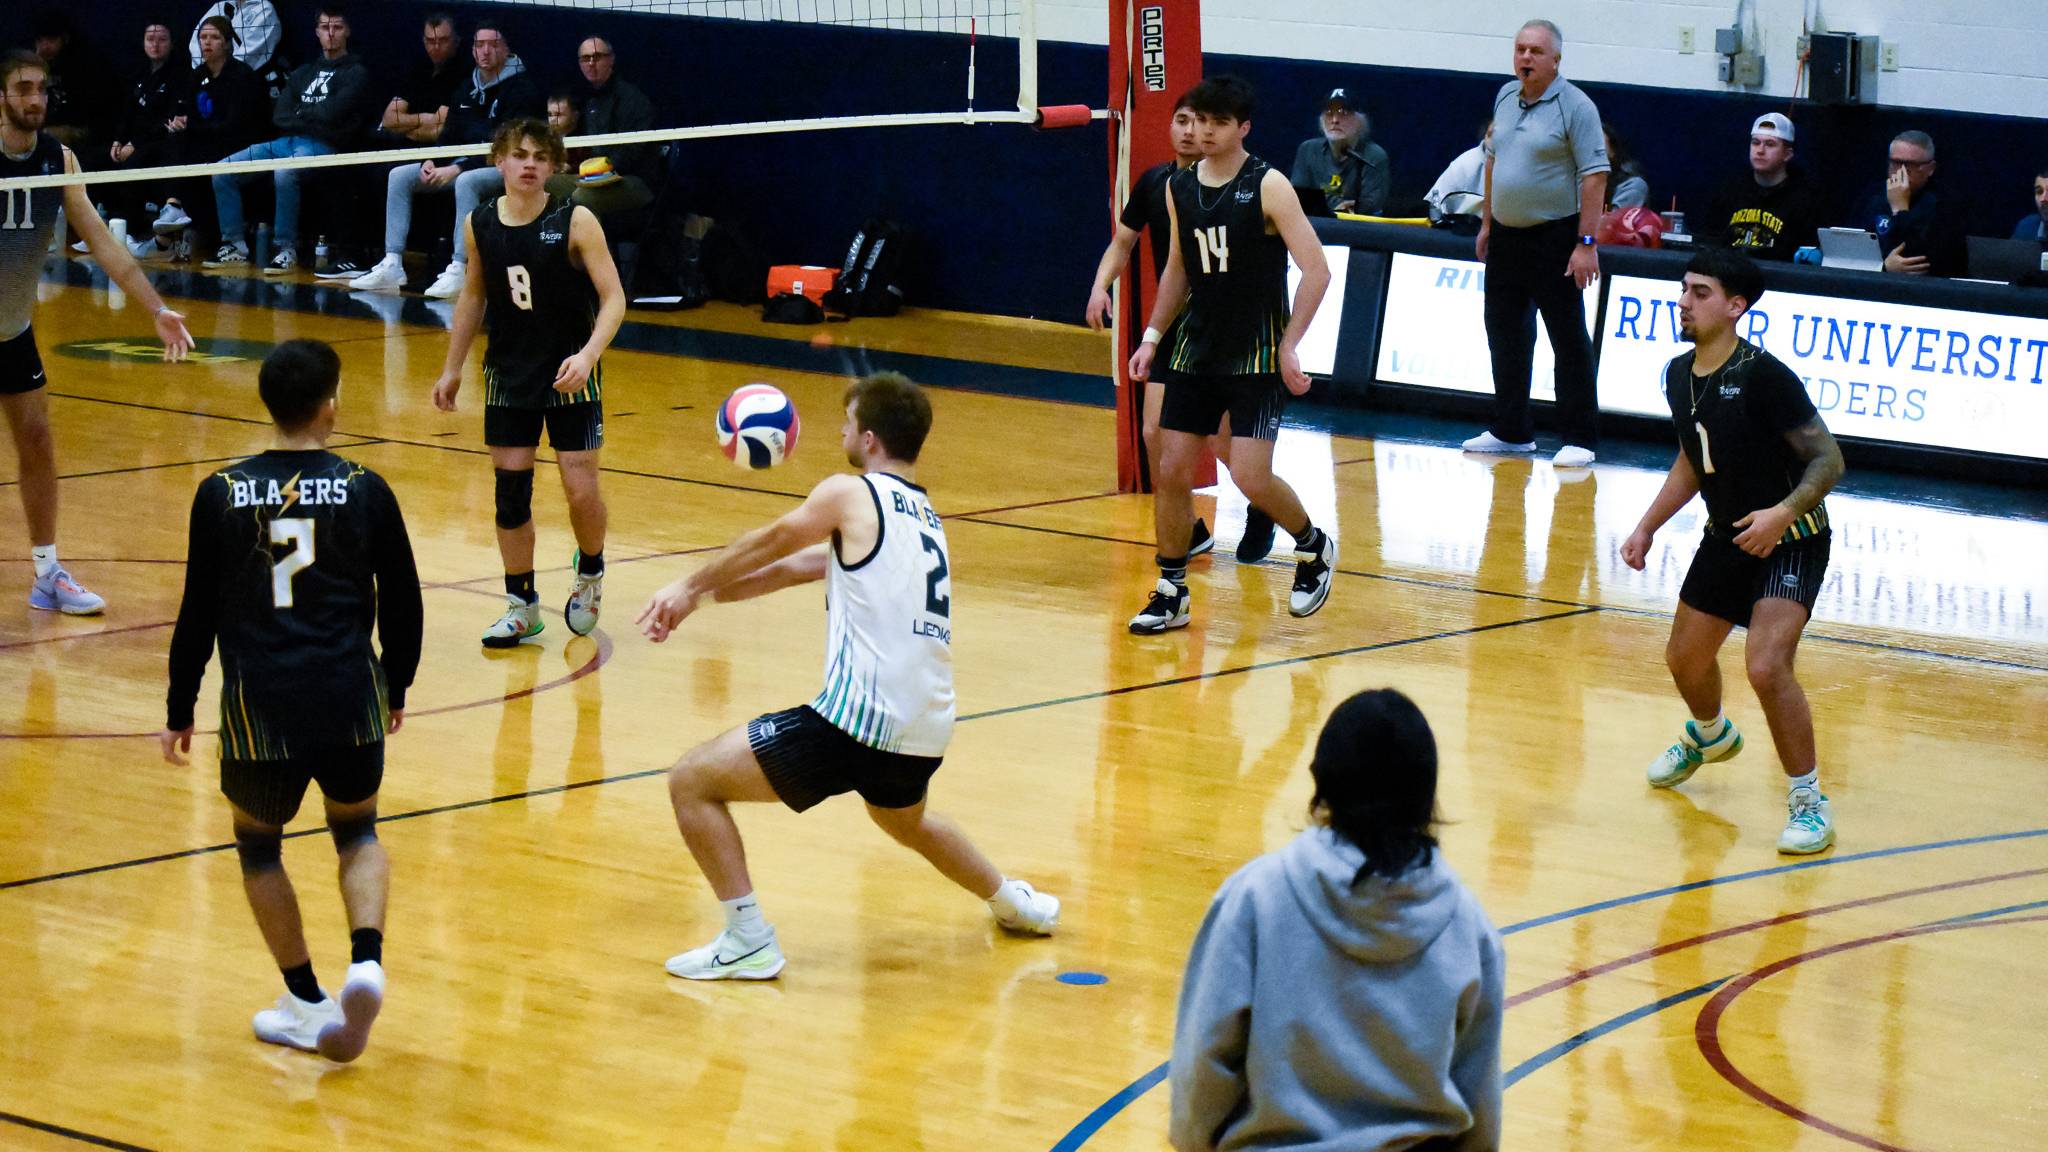 Men's Volleyball Competes Against Nationally Ranked Lasell